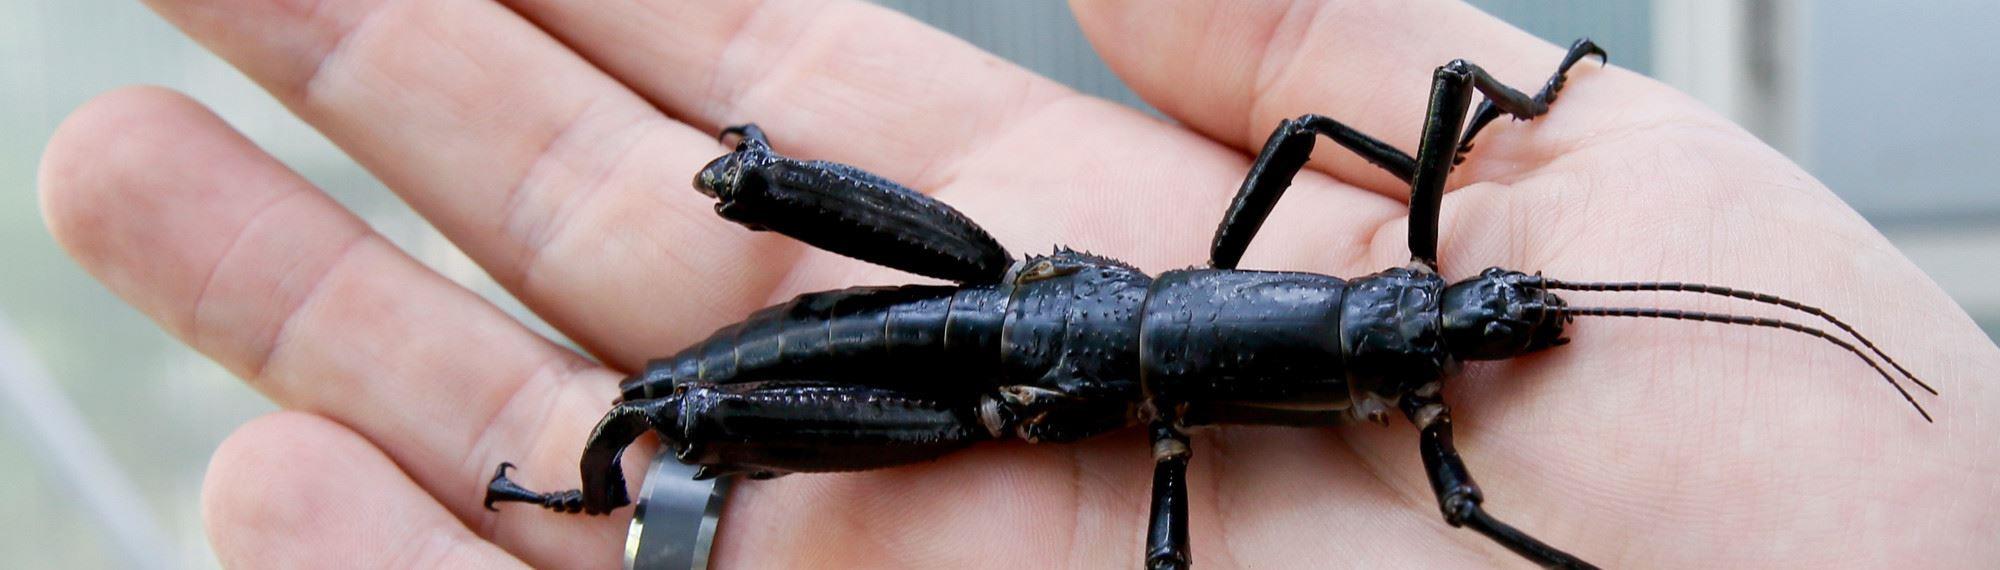 Lord Howe Island Stick Insect on a persons hand. The insect has six legs, a long black body and two antennas on its head.